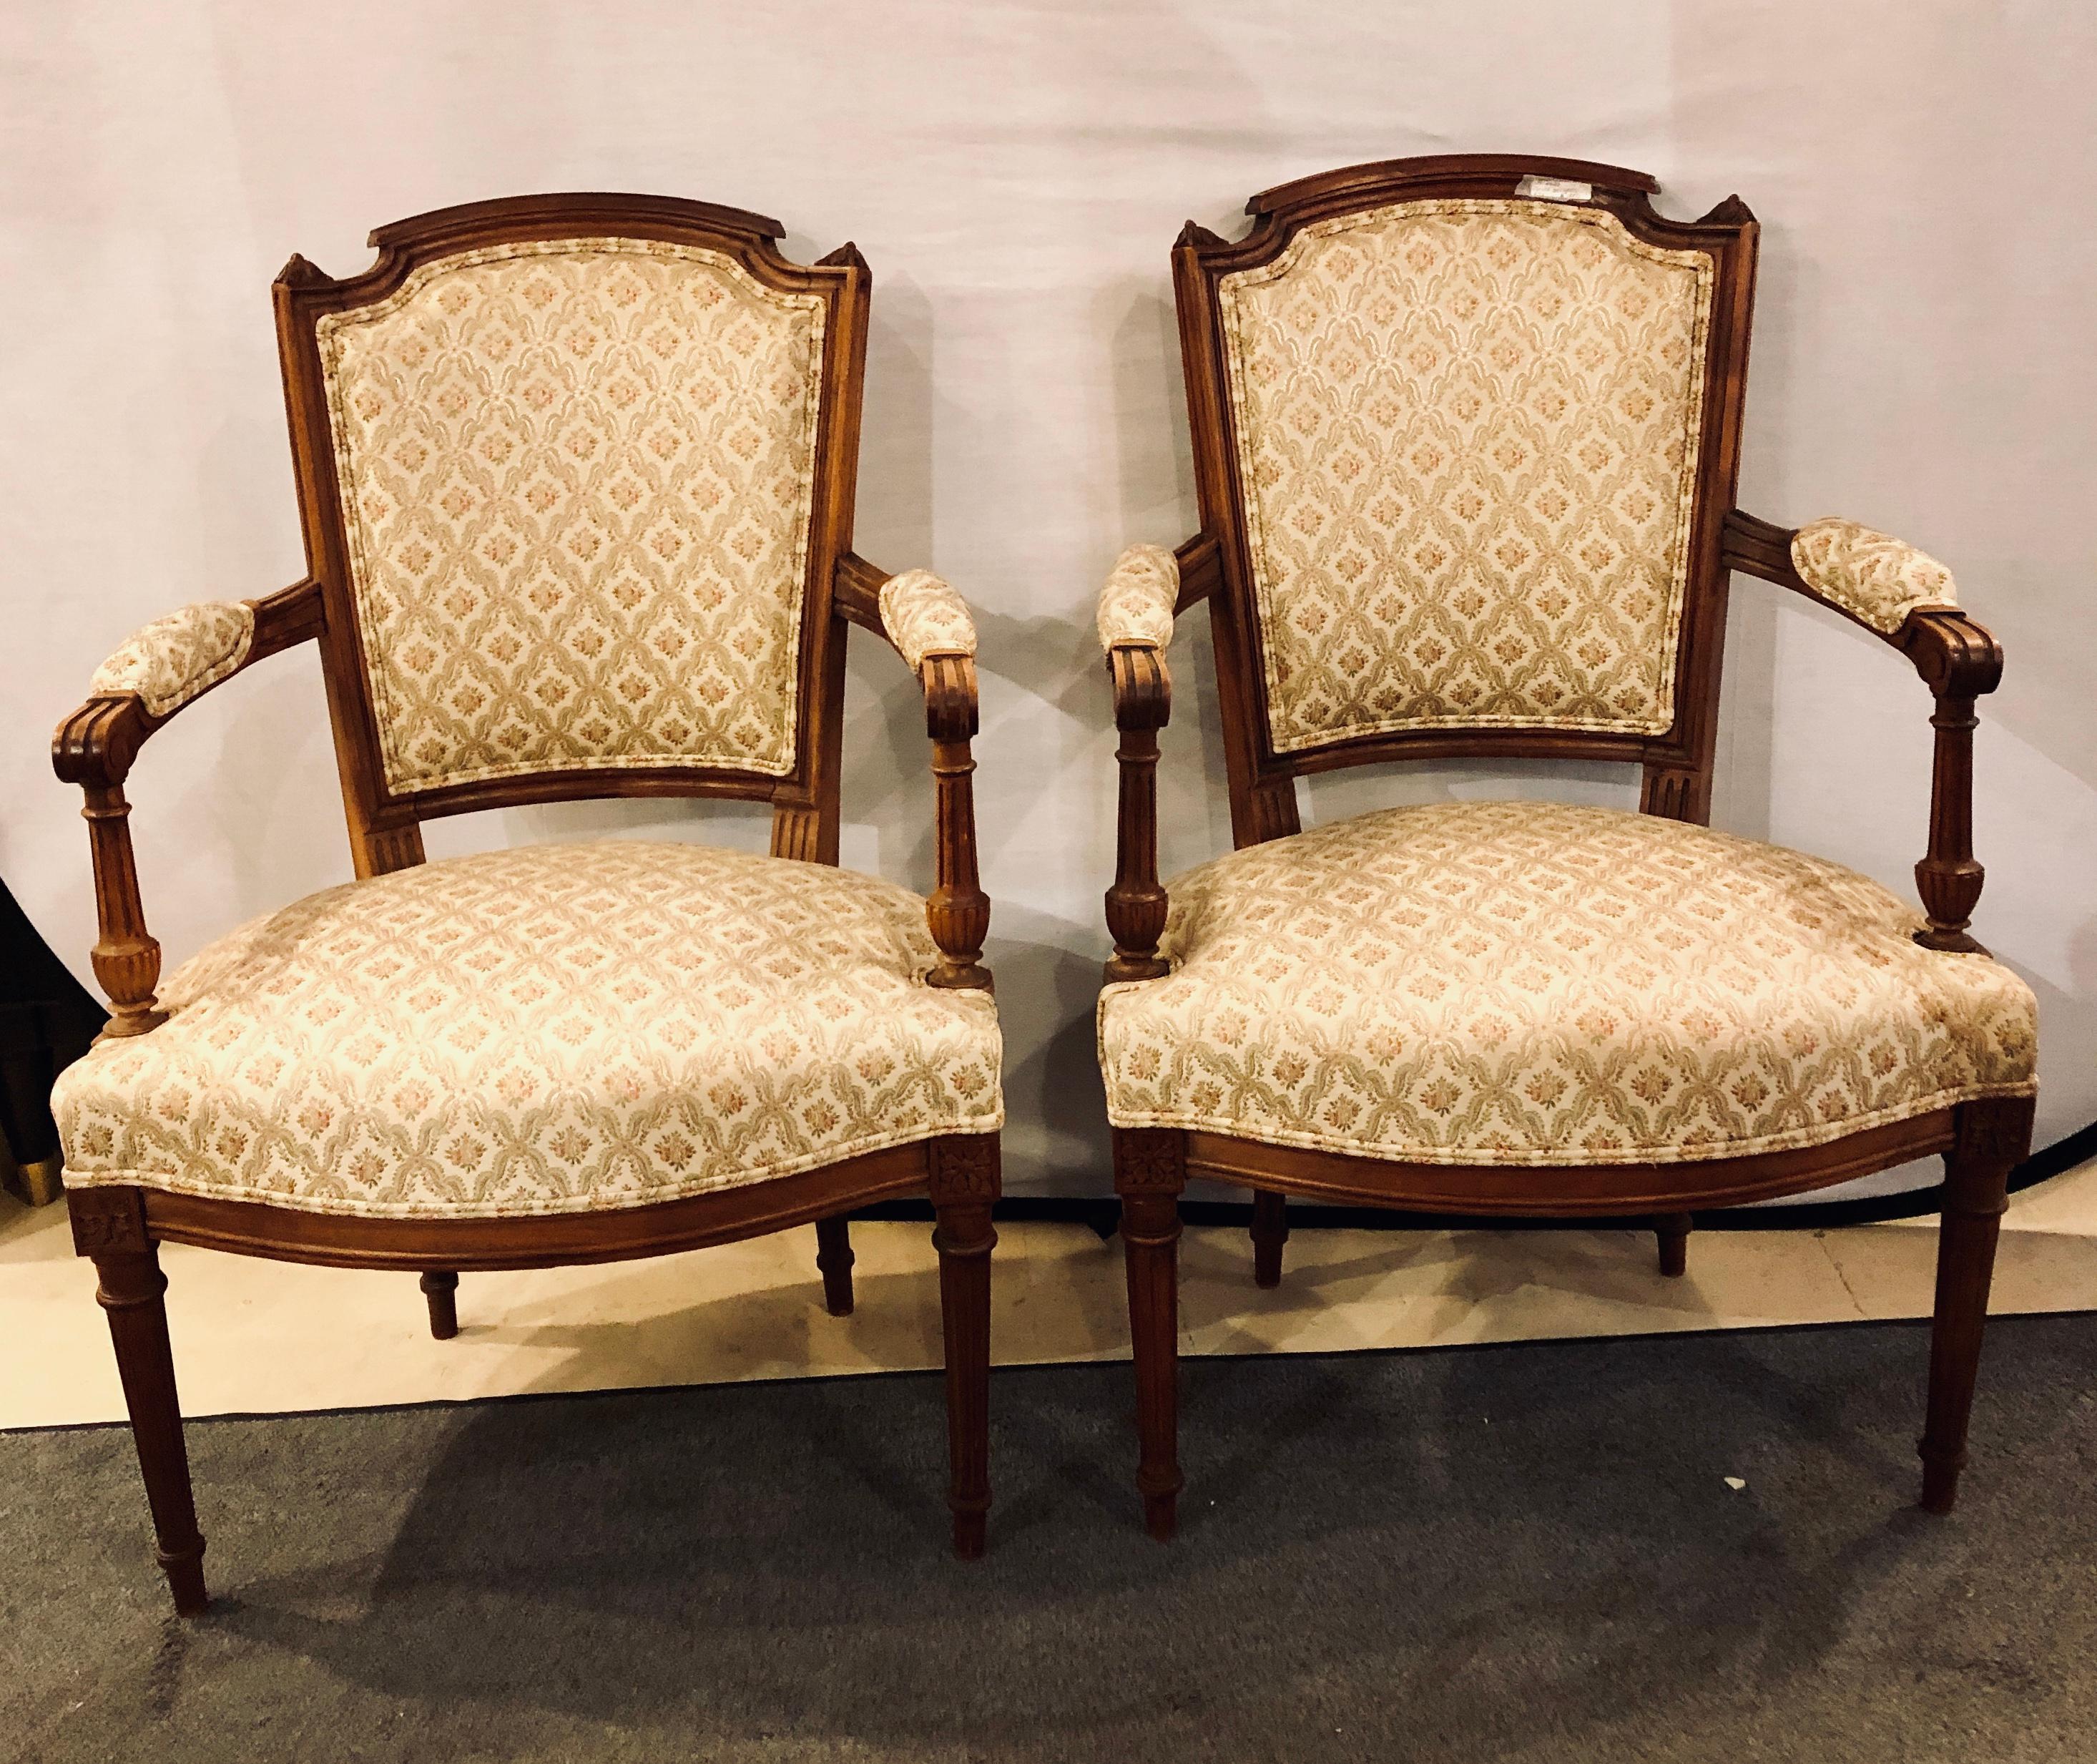 A fine pair of French custom Louis XVI style carved bergere or armchairs each in a nice fabric with carved lines and open side arms.